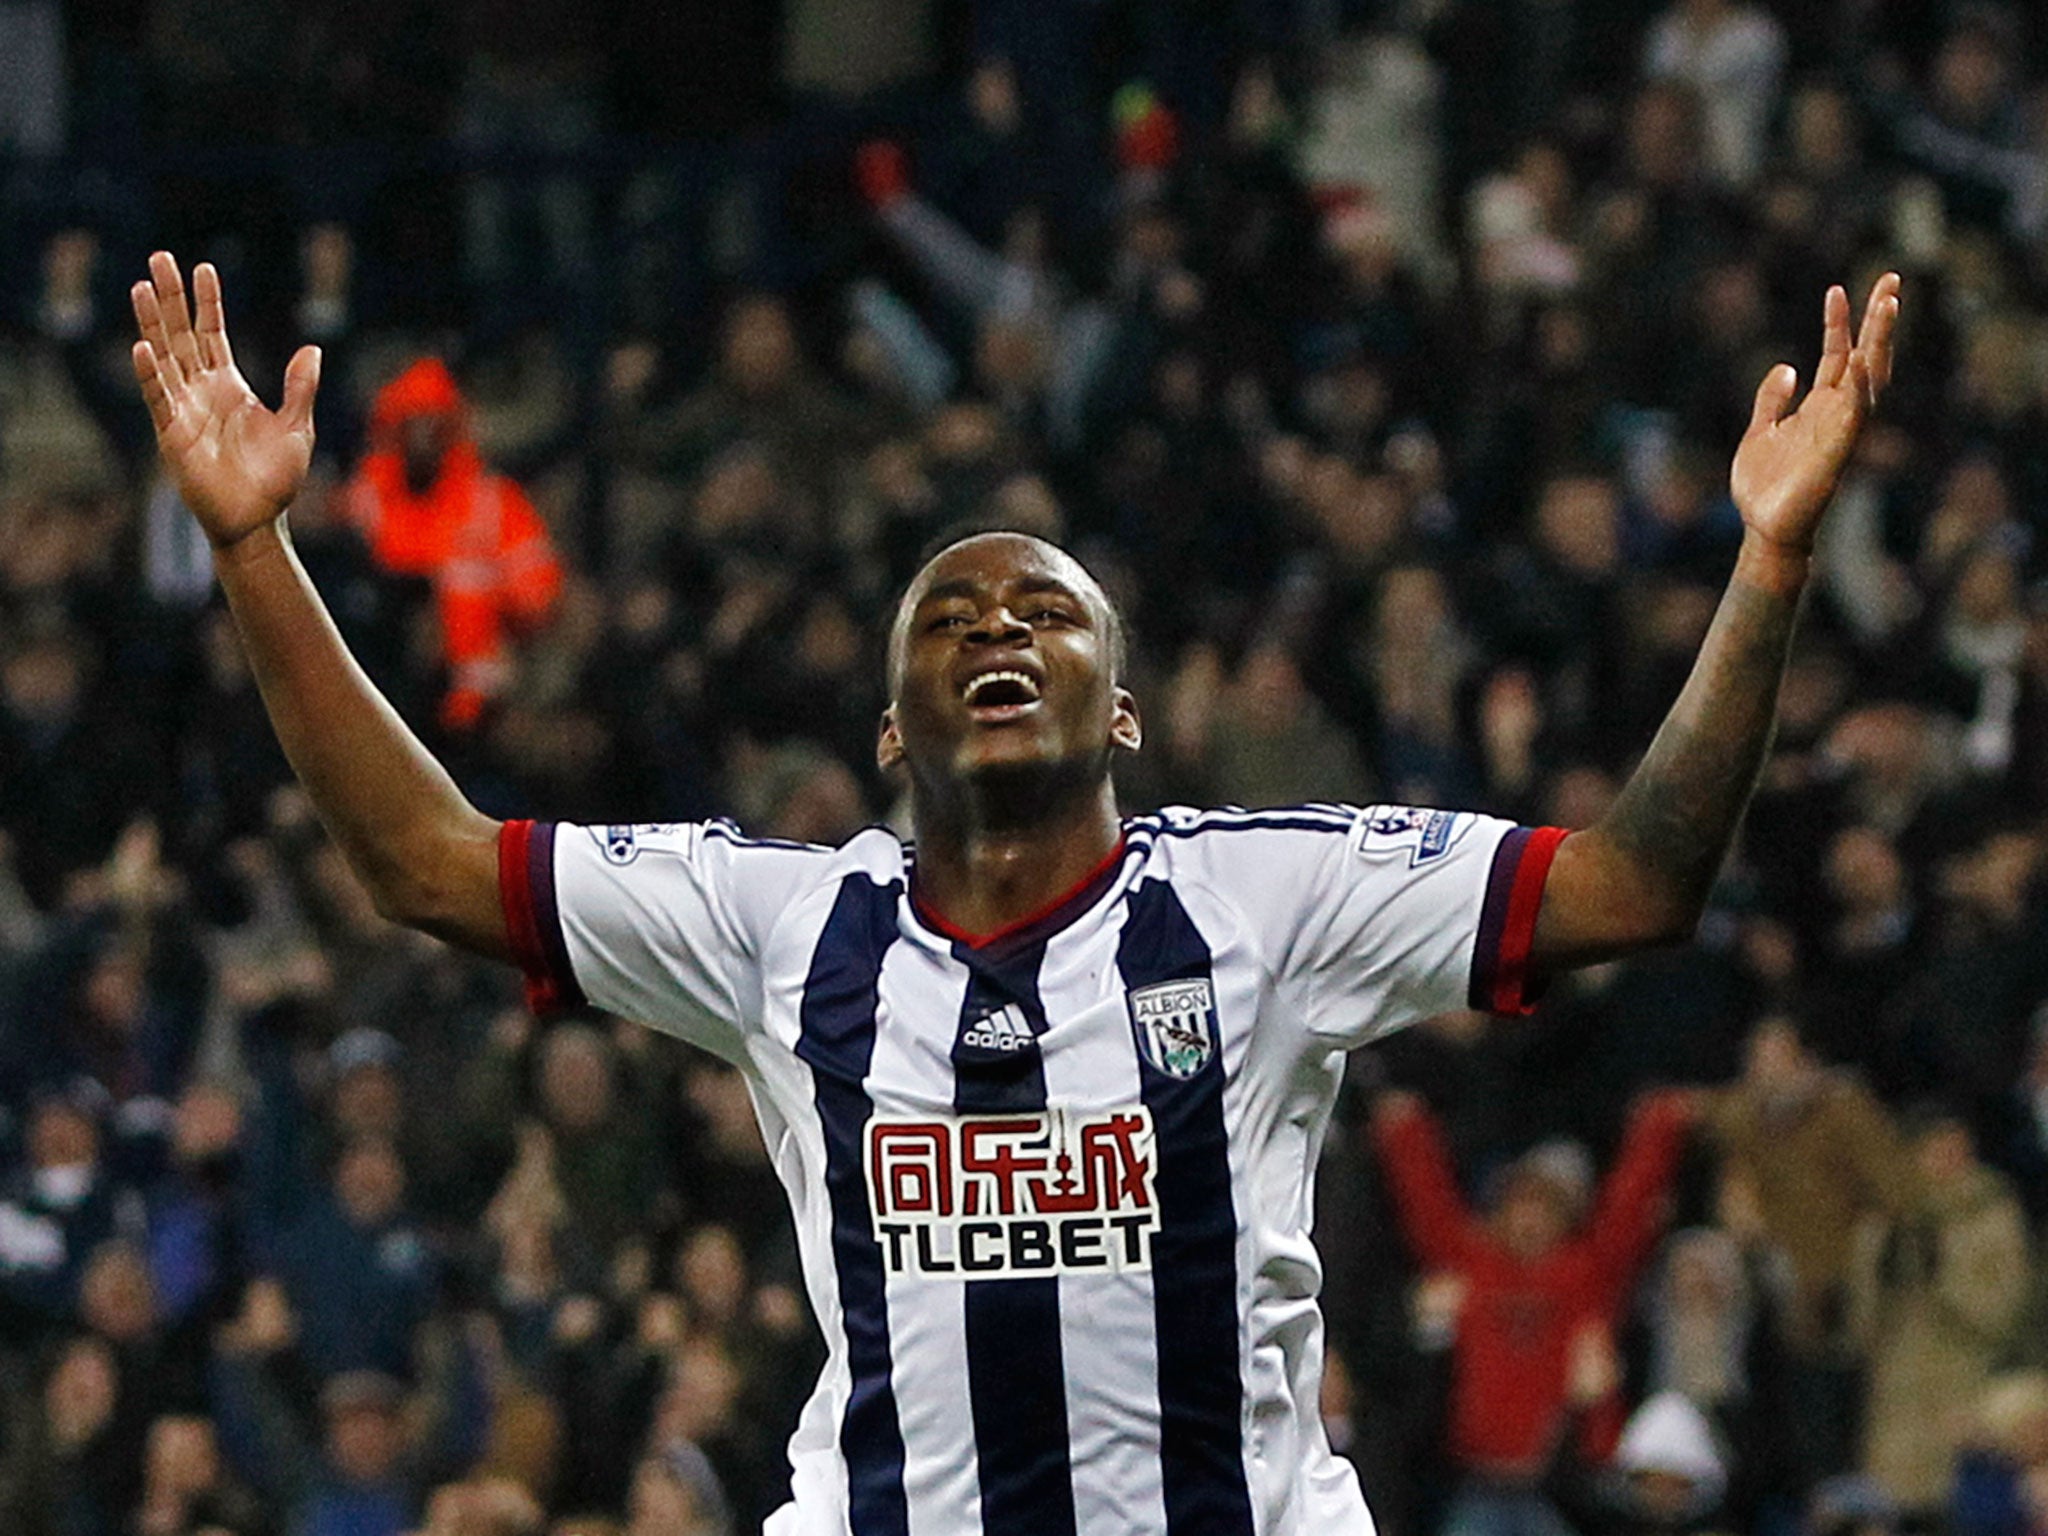 Saido Berahino made one goal and scored one in his best performance of the season